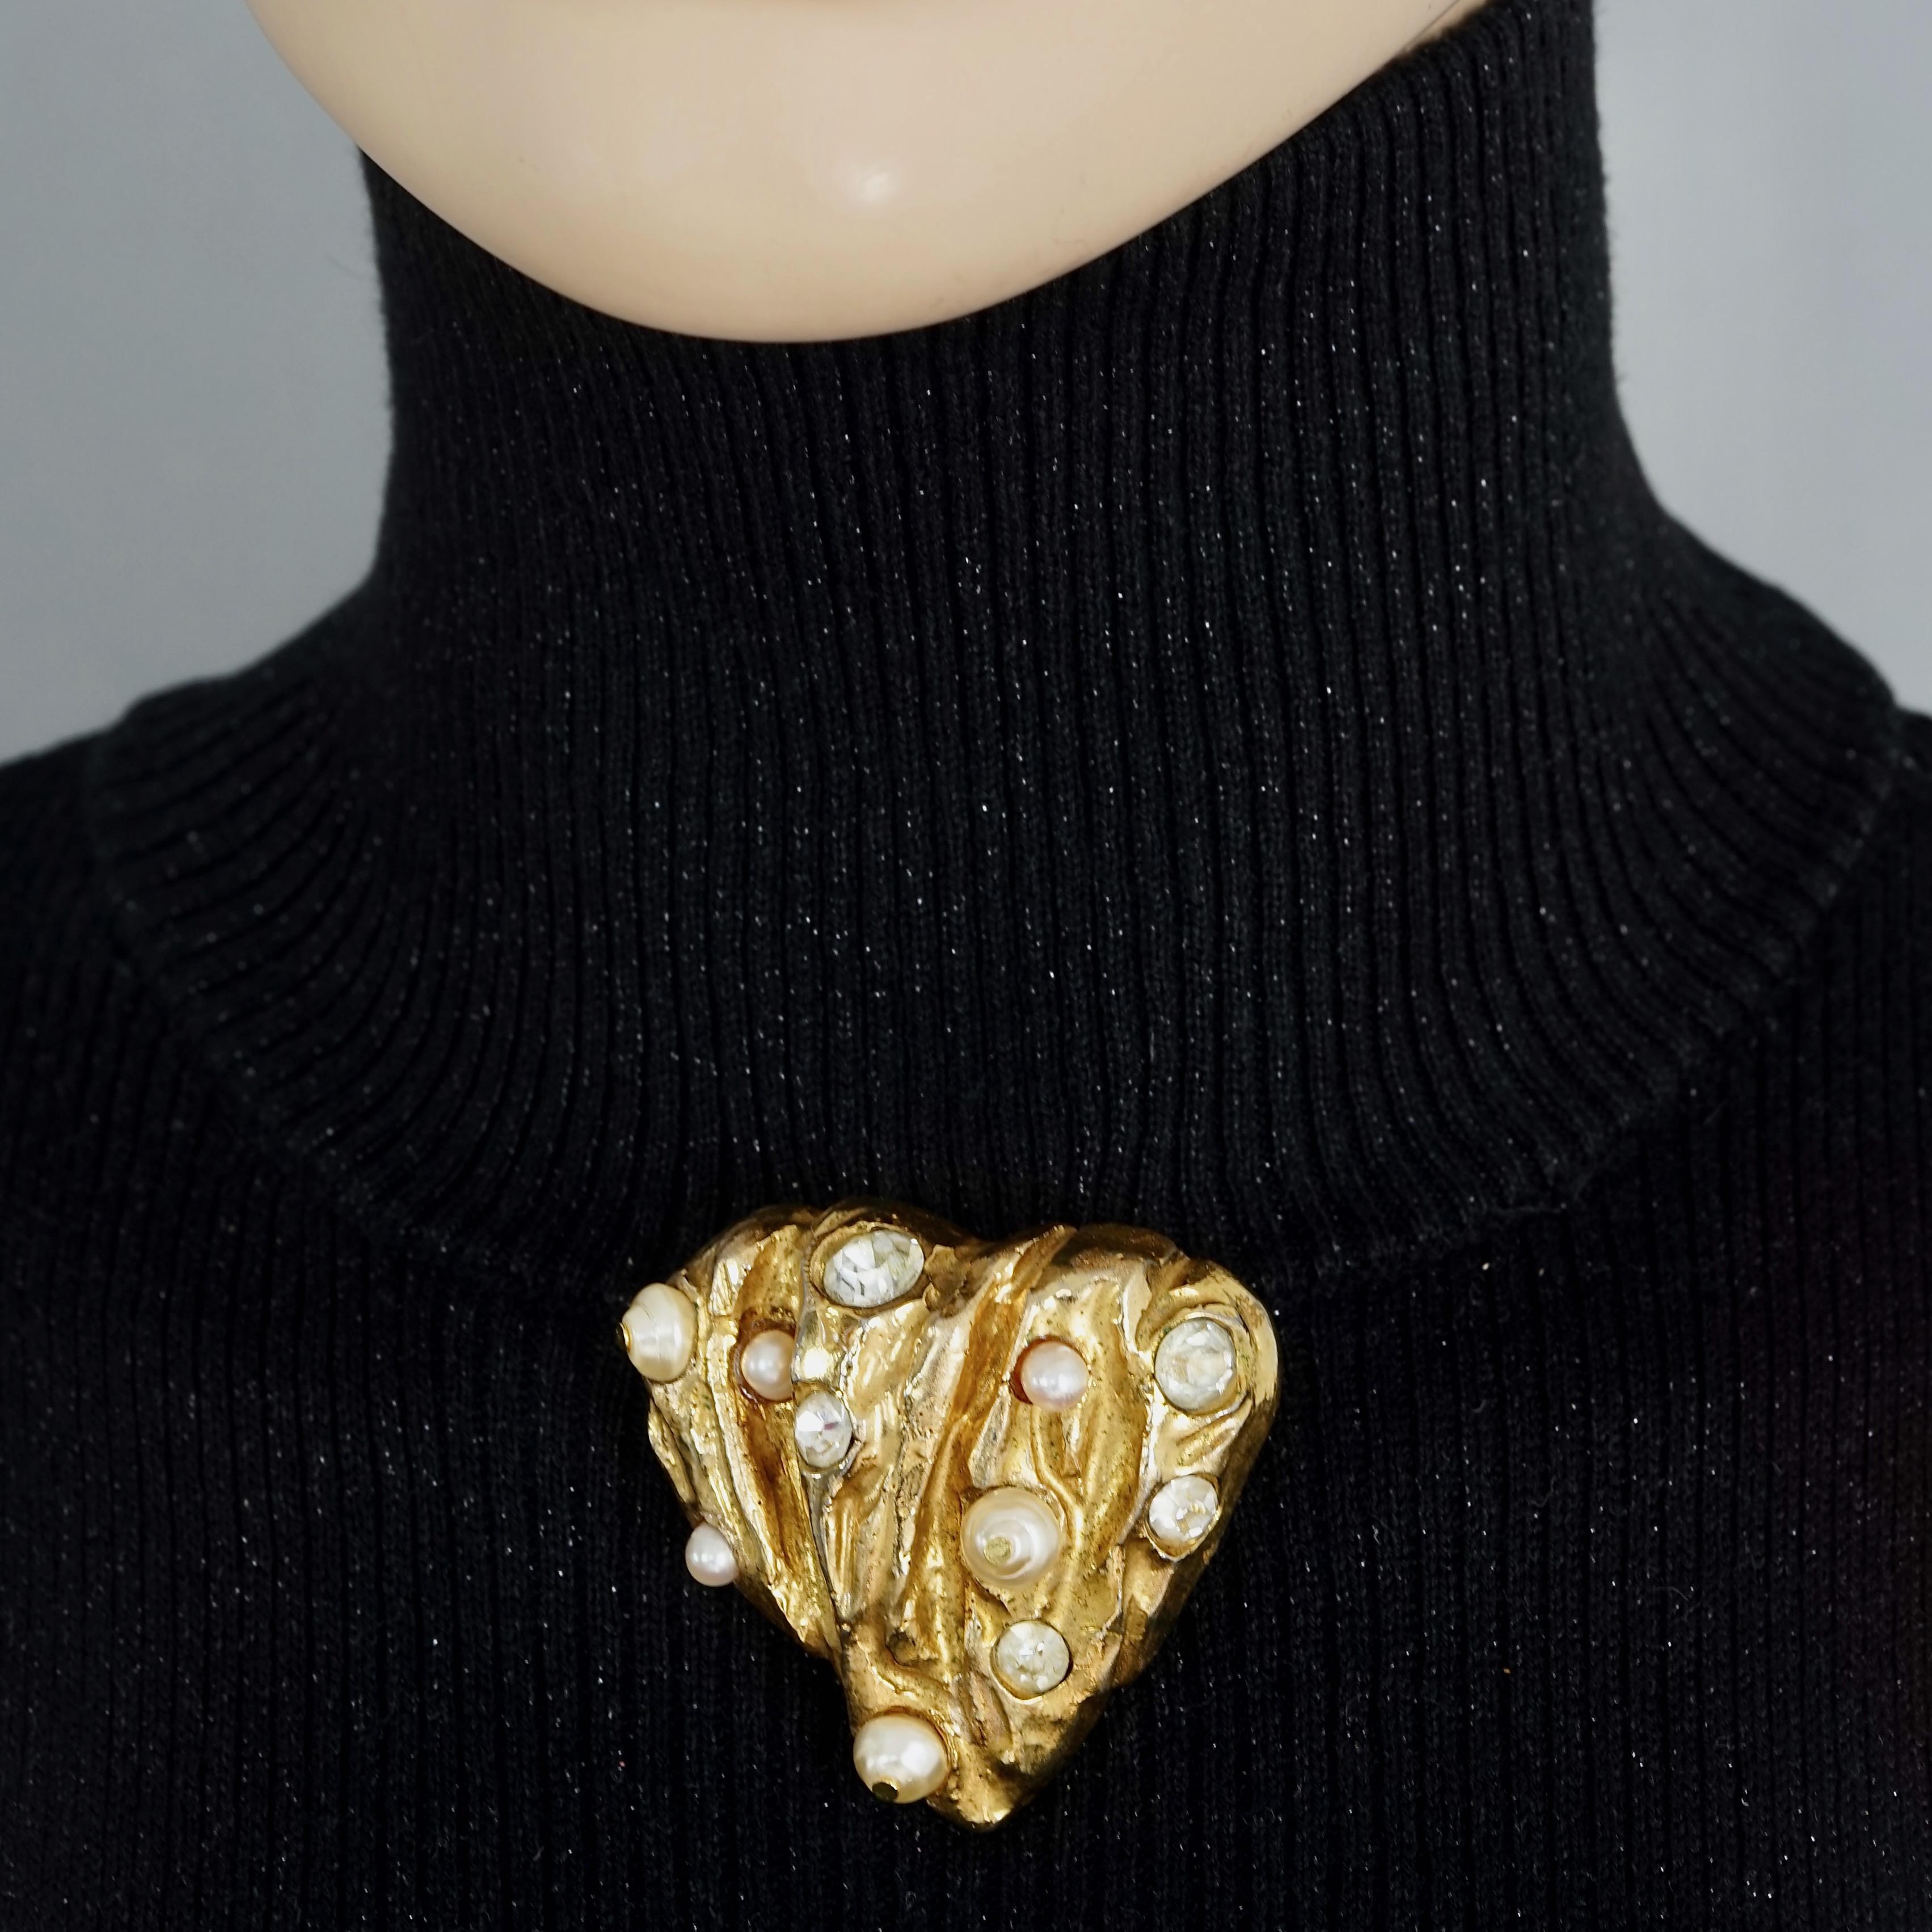 Vintage CHRISTIAN LACROIX Textured Heart Pearl Rhinestone Brooch

Measurements:
Height: 2 inches (5.1 cm)
Width: 2.16 inches (5.5 cm)

Features:
- 100% Authentic CHRISTIAN LACROIX.
- Gold textured and sculptured heart brooch.
- Embellished with